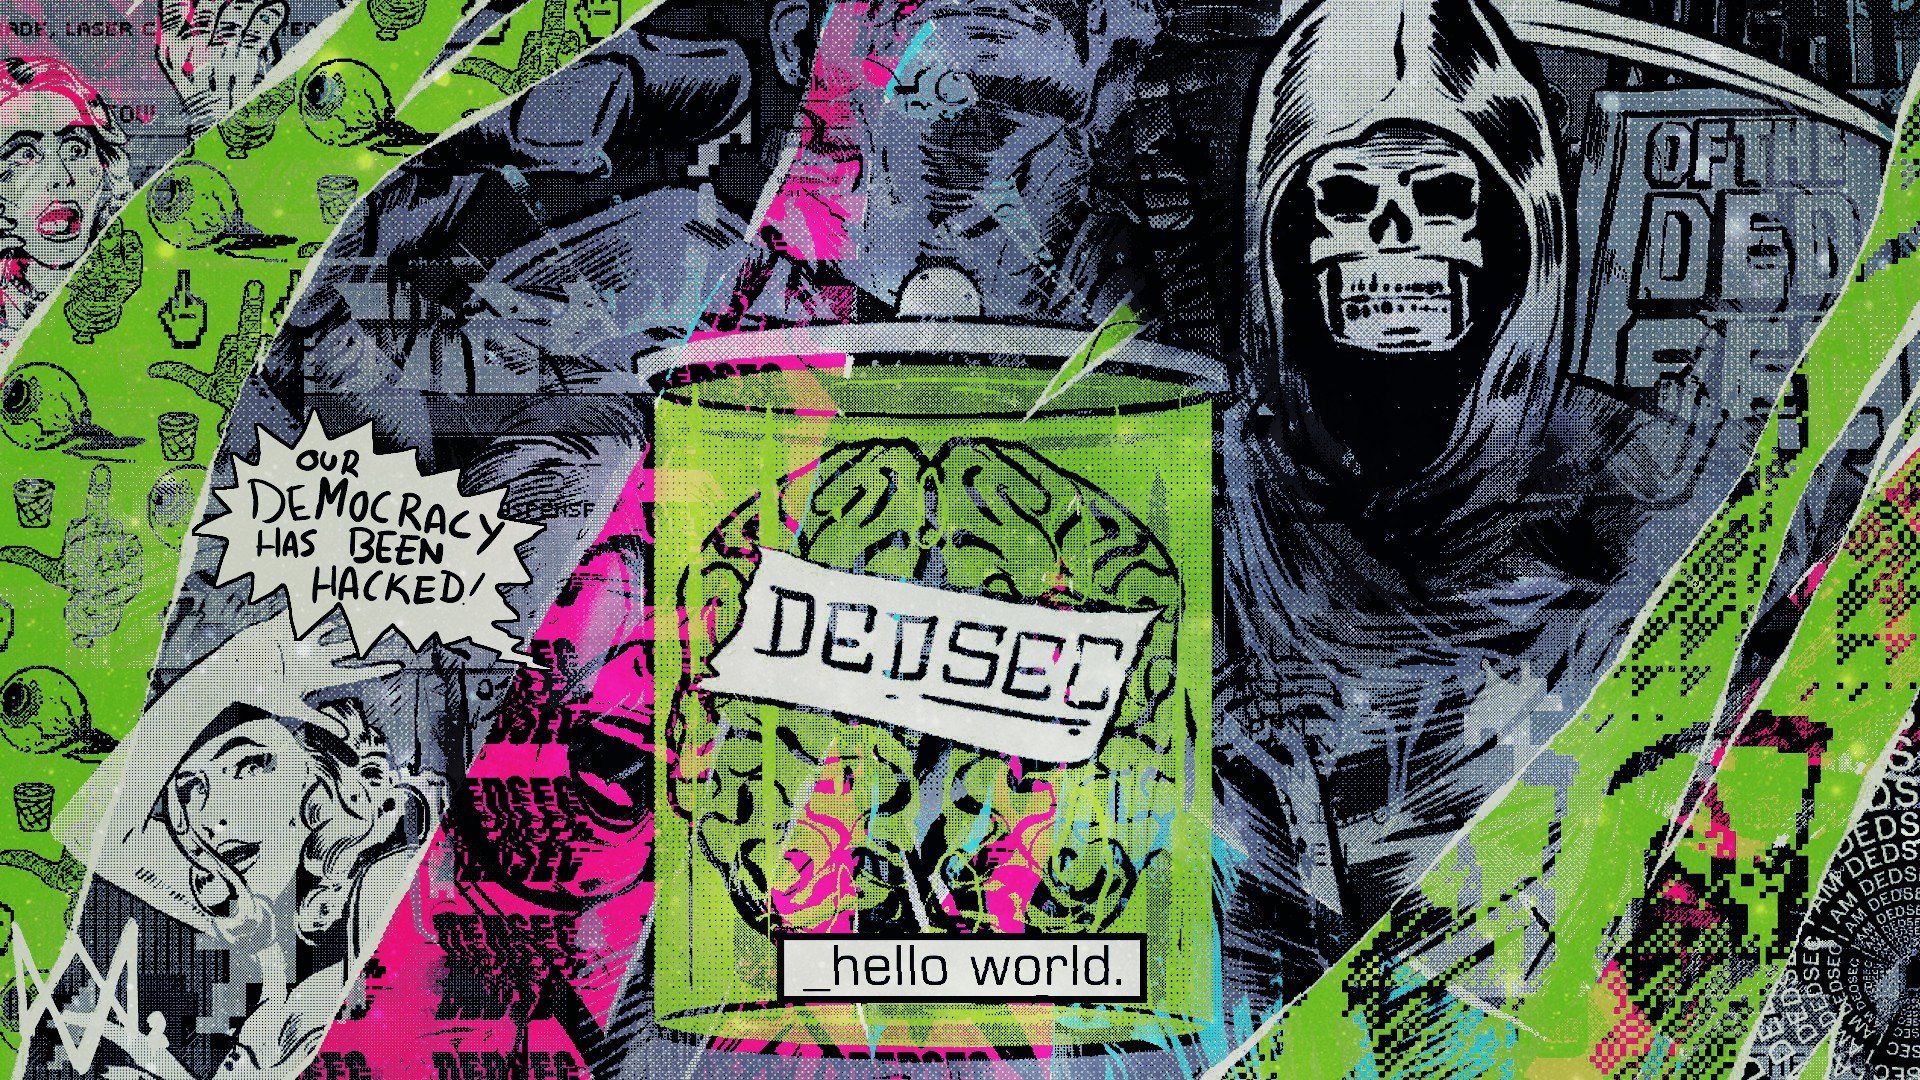 DEDSEC, Watch Dogs, Hacking, Democracy, Hello World, Watch Dogs 2